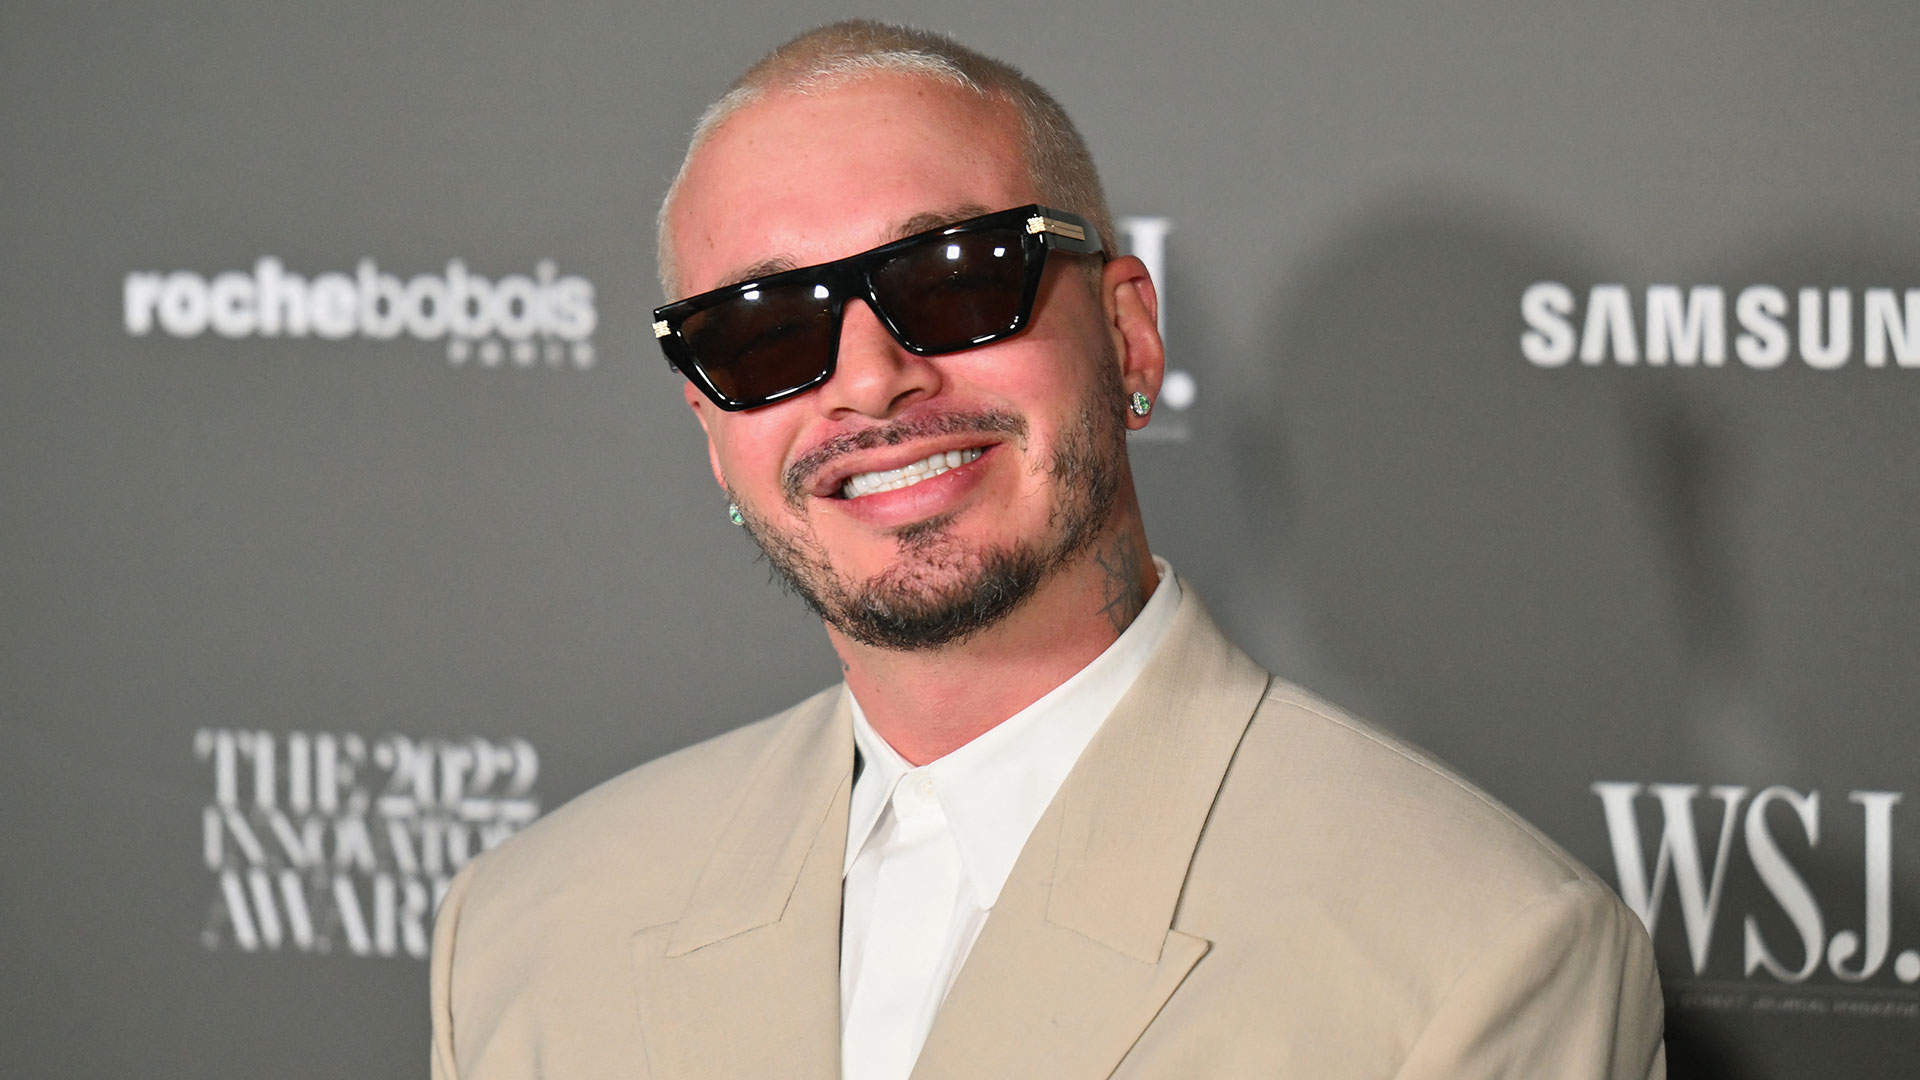 Colombian singer J Balvin arrives for the Wall Street Journal Magazine 2022 Innovator awards at the Museum of Modern Art (MoMA) in New York City on November 2, 2022. (Photo by ANGELA WEISS / AFP)